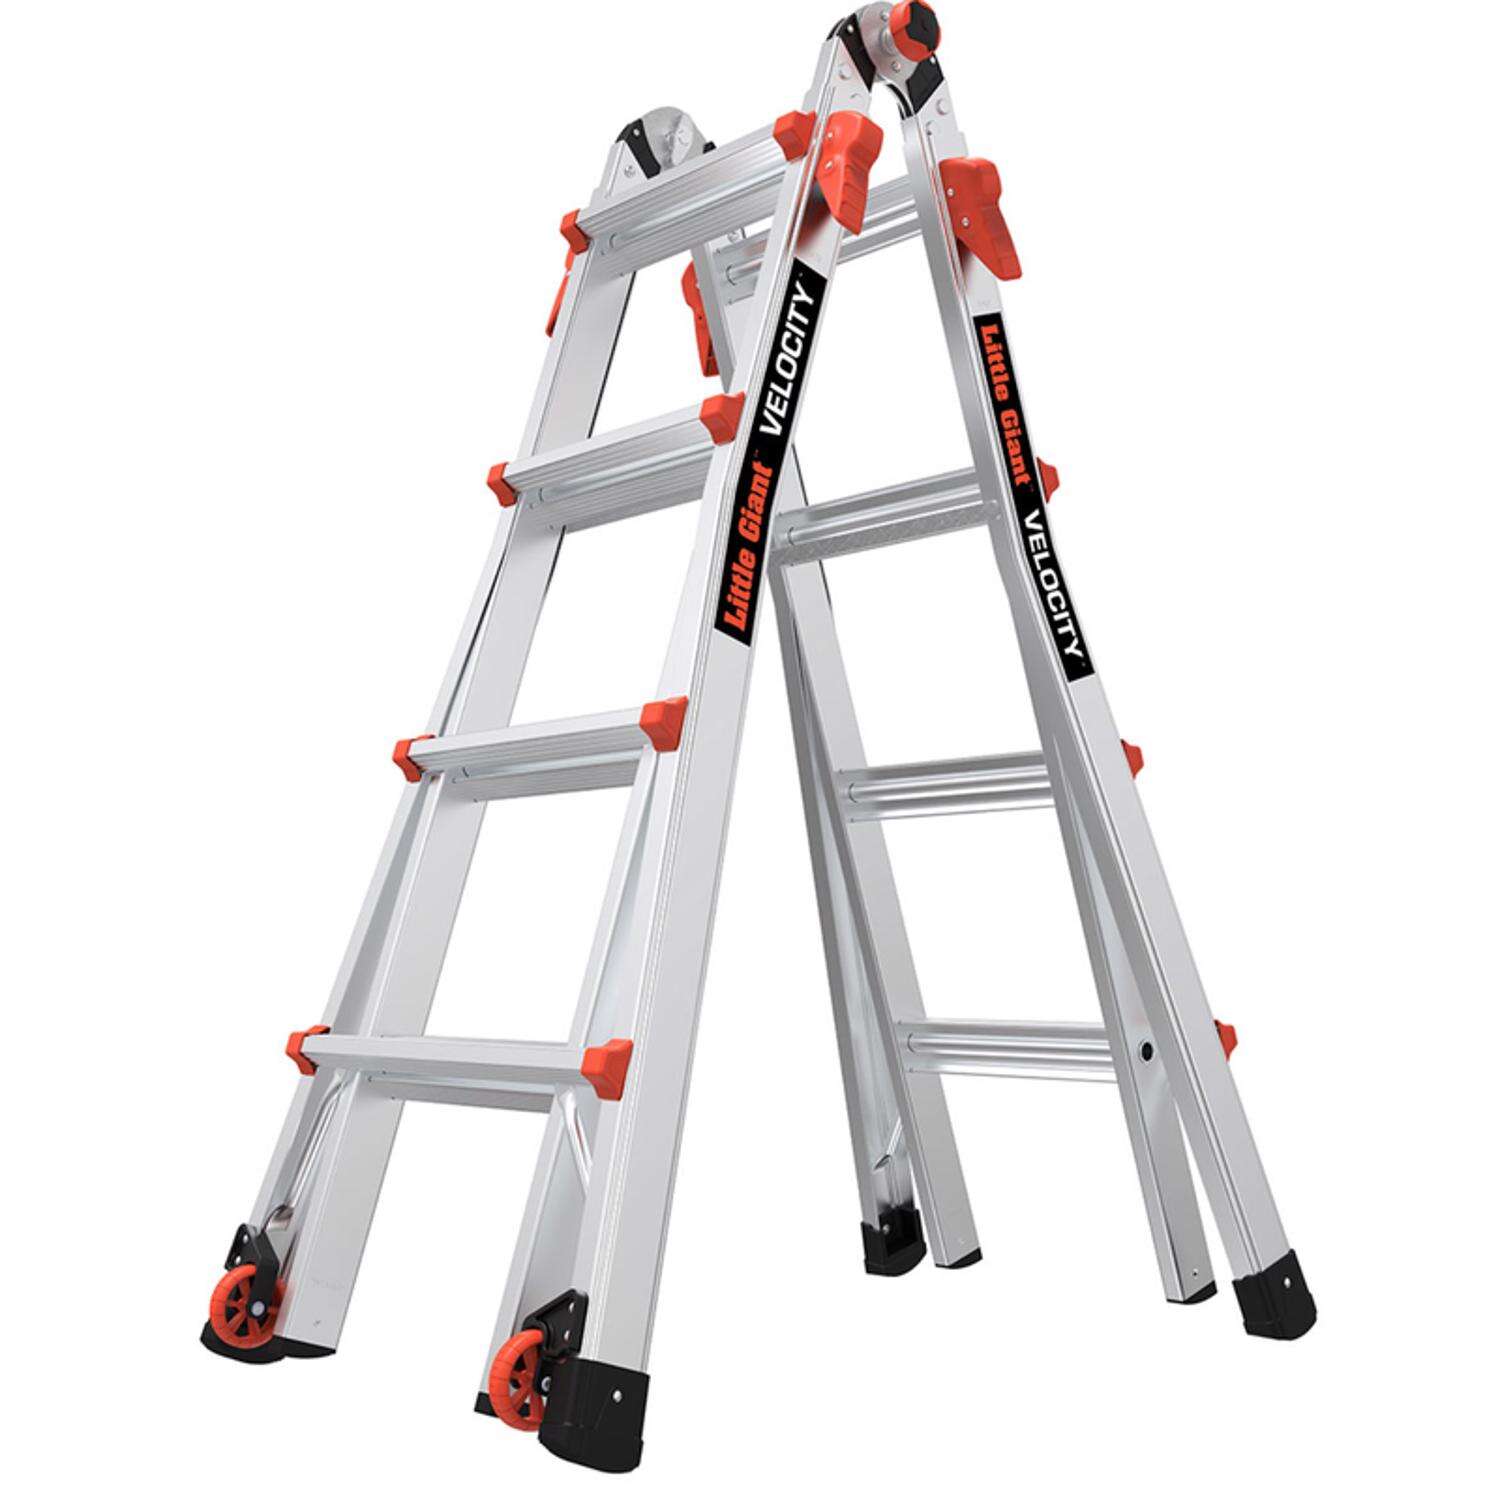 Gift ‘Little Giant’ Velocity 17-Foot Telescoping Multi-Position Ladder by Ace Hardware